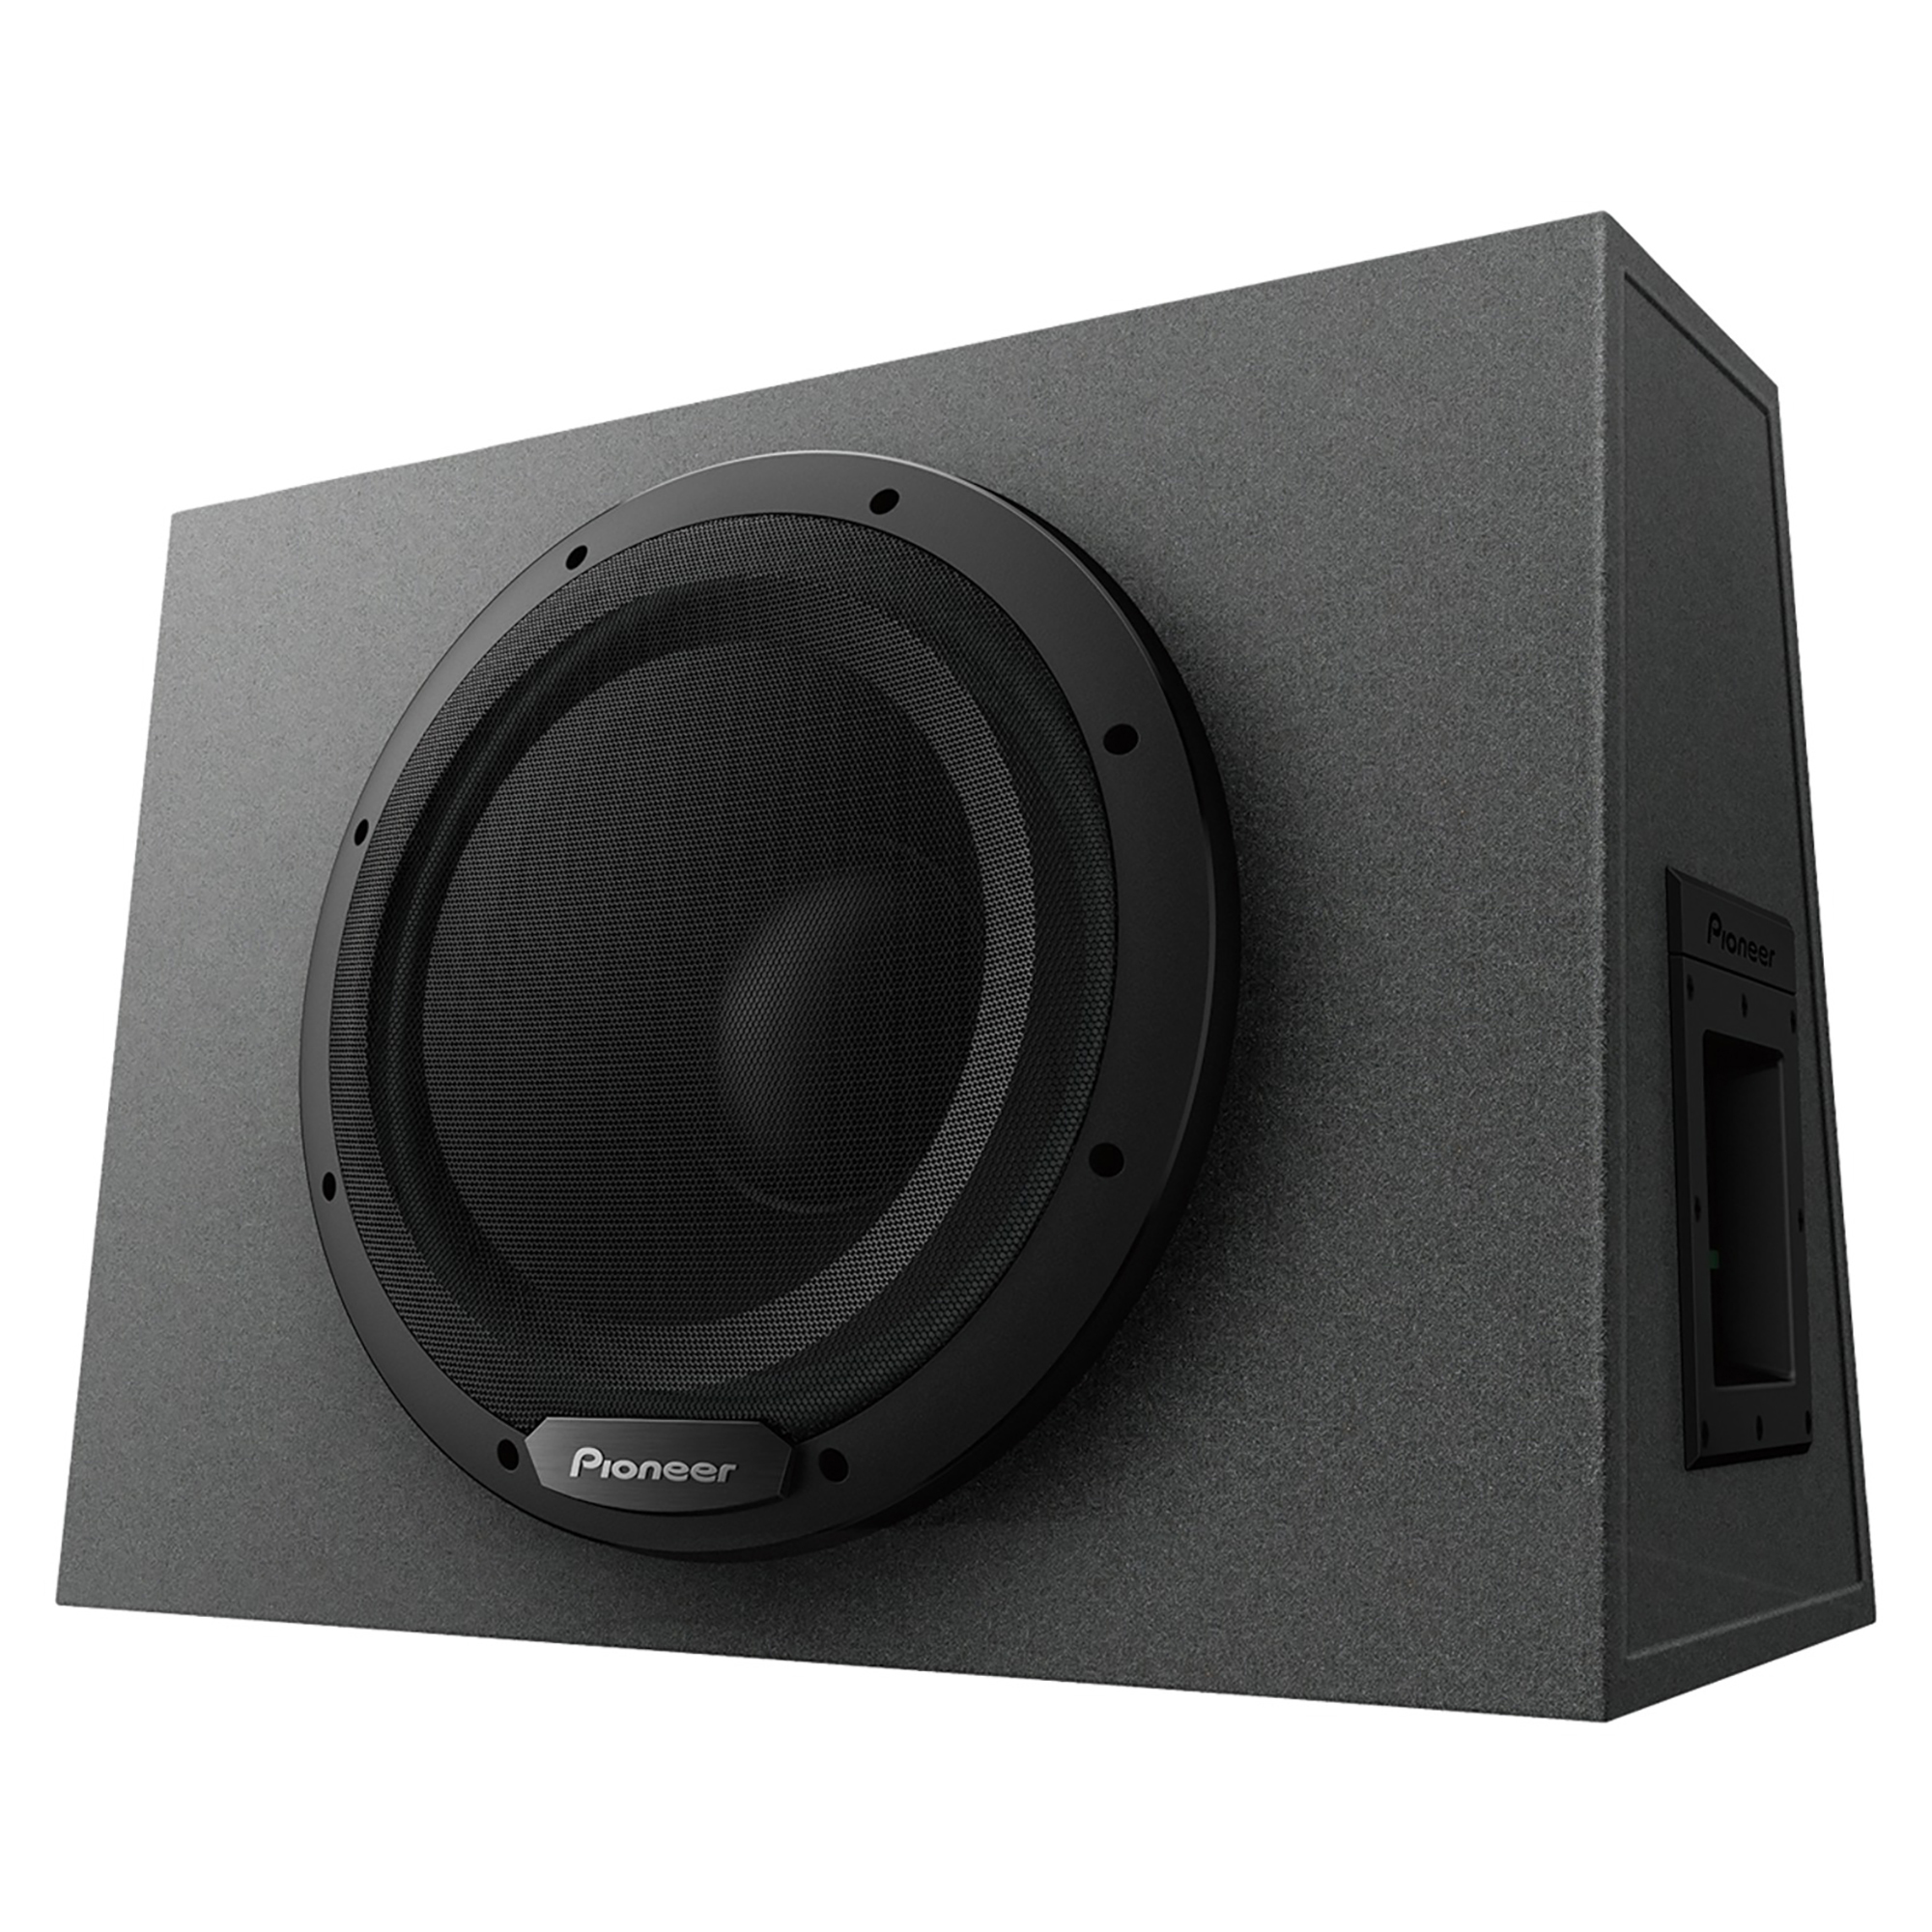 Pioneer, Sealed Active Subwoofer with Built-in Class D Amp, Model TS-WX1210A